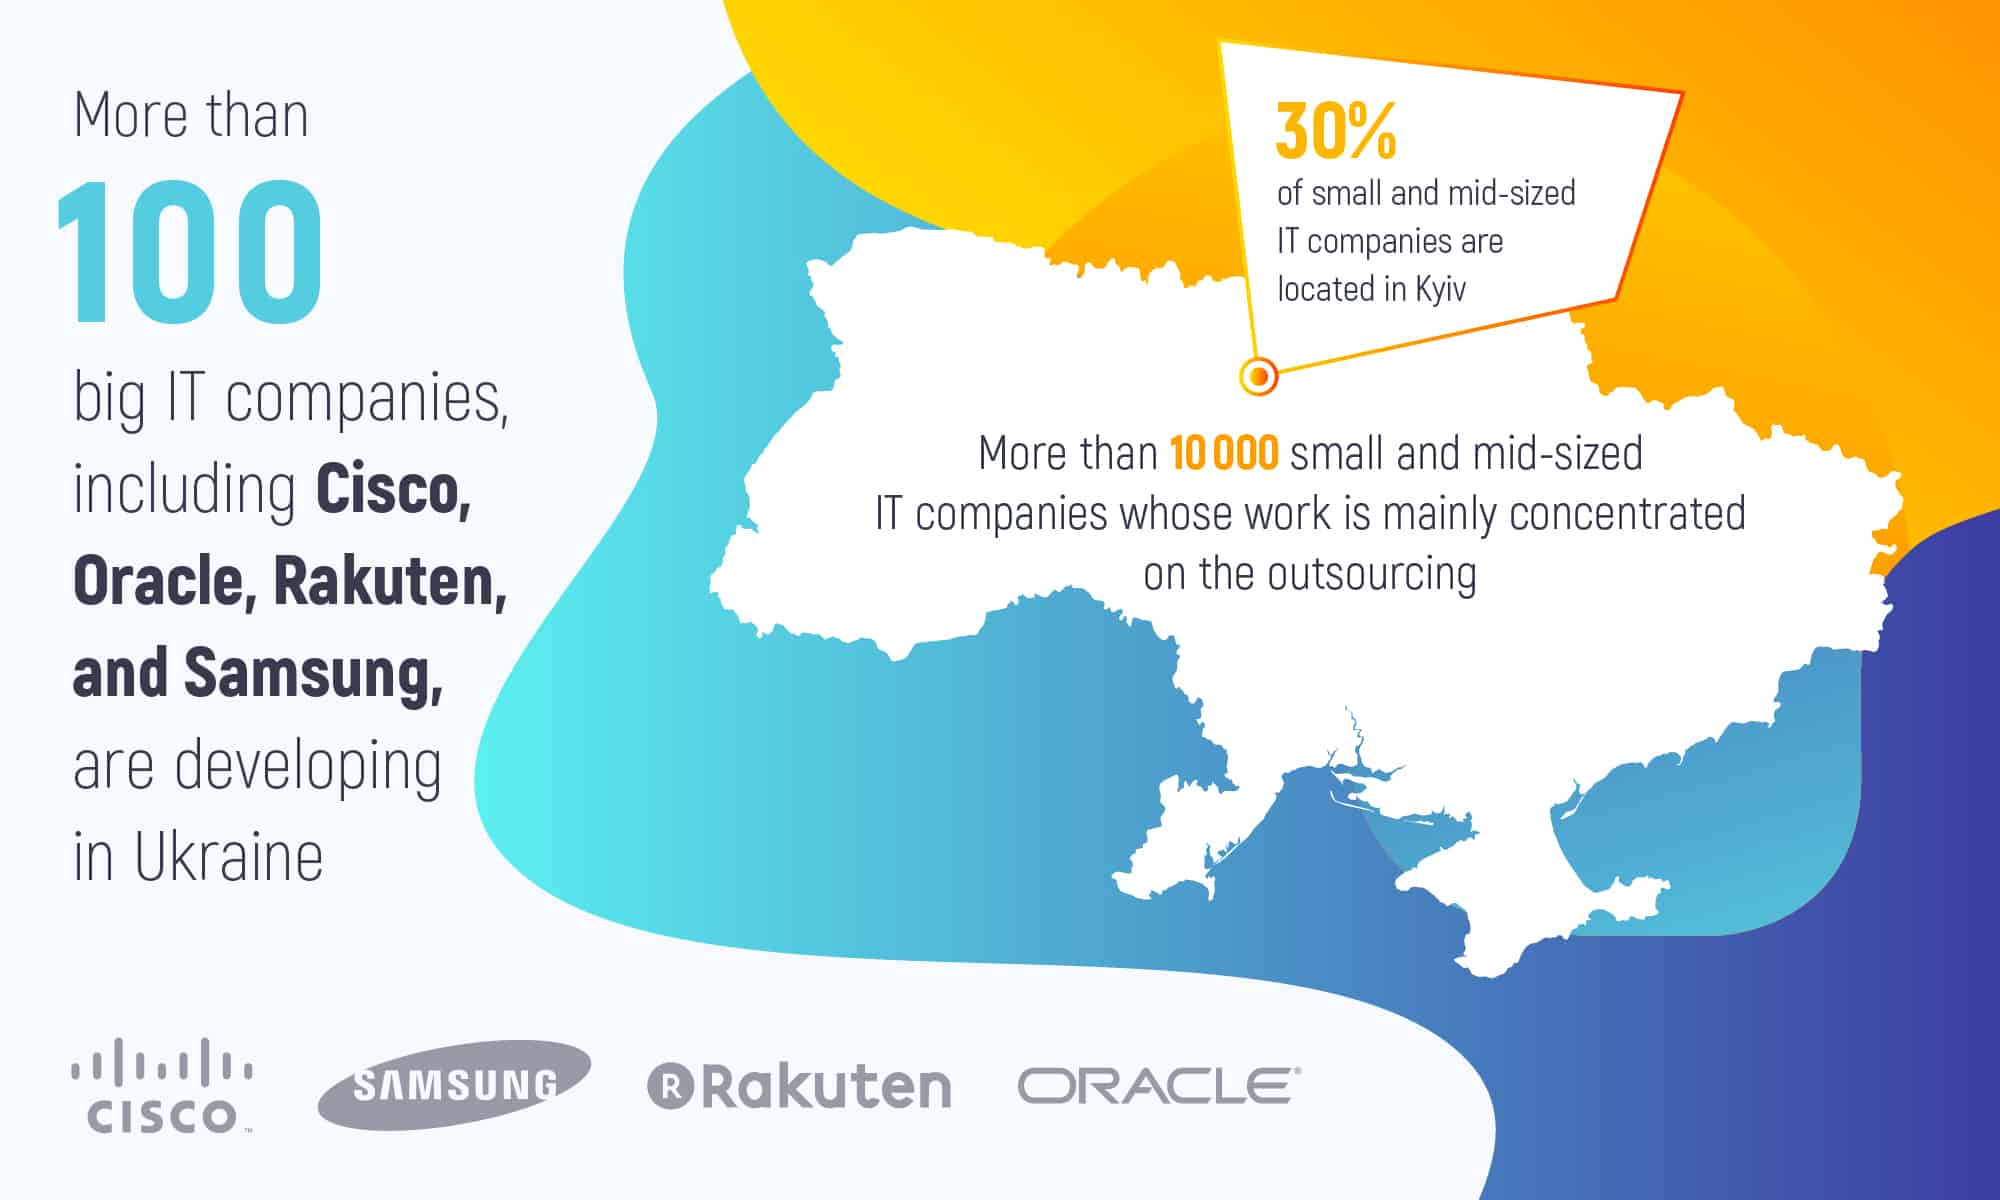 IT companies that are developing in Ukraine